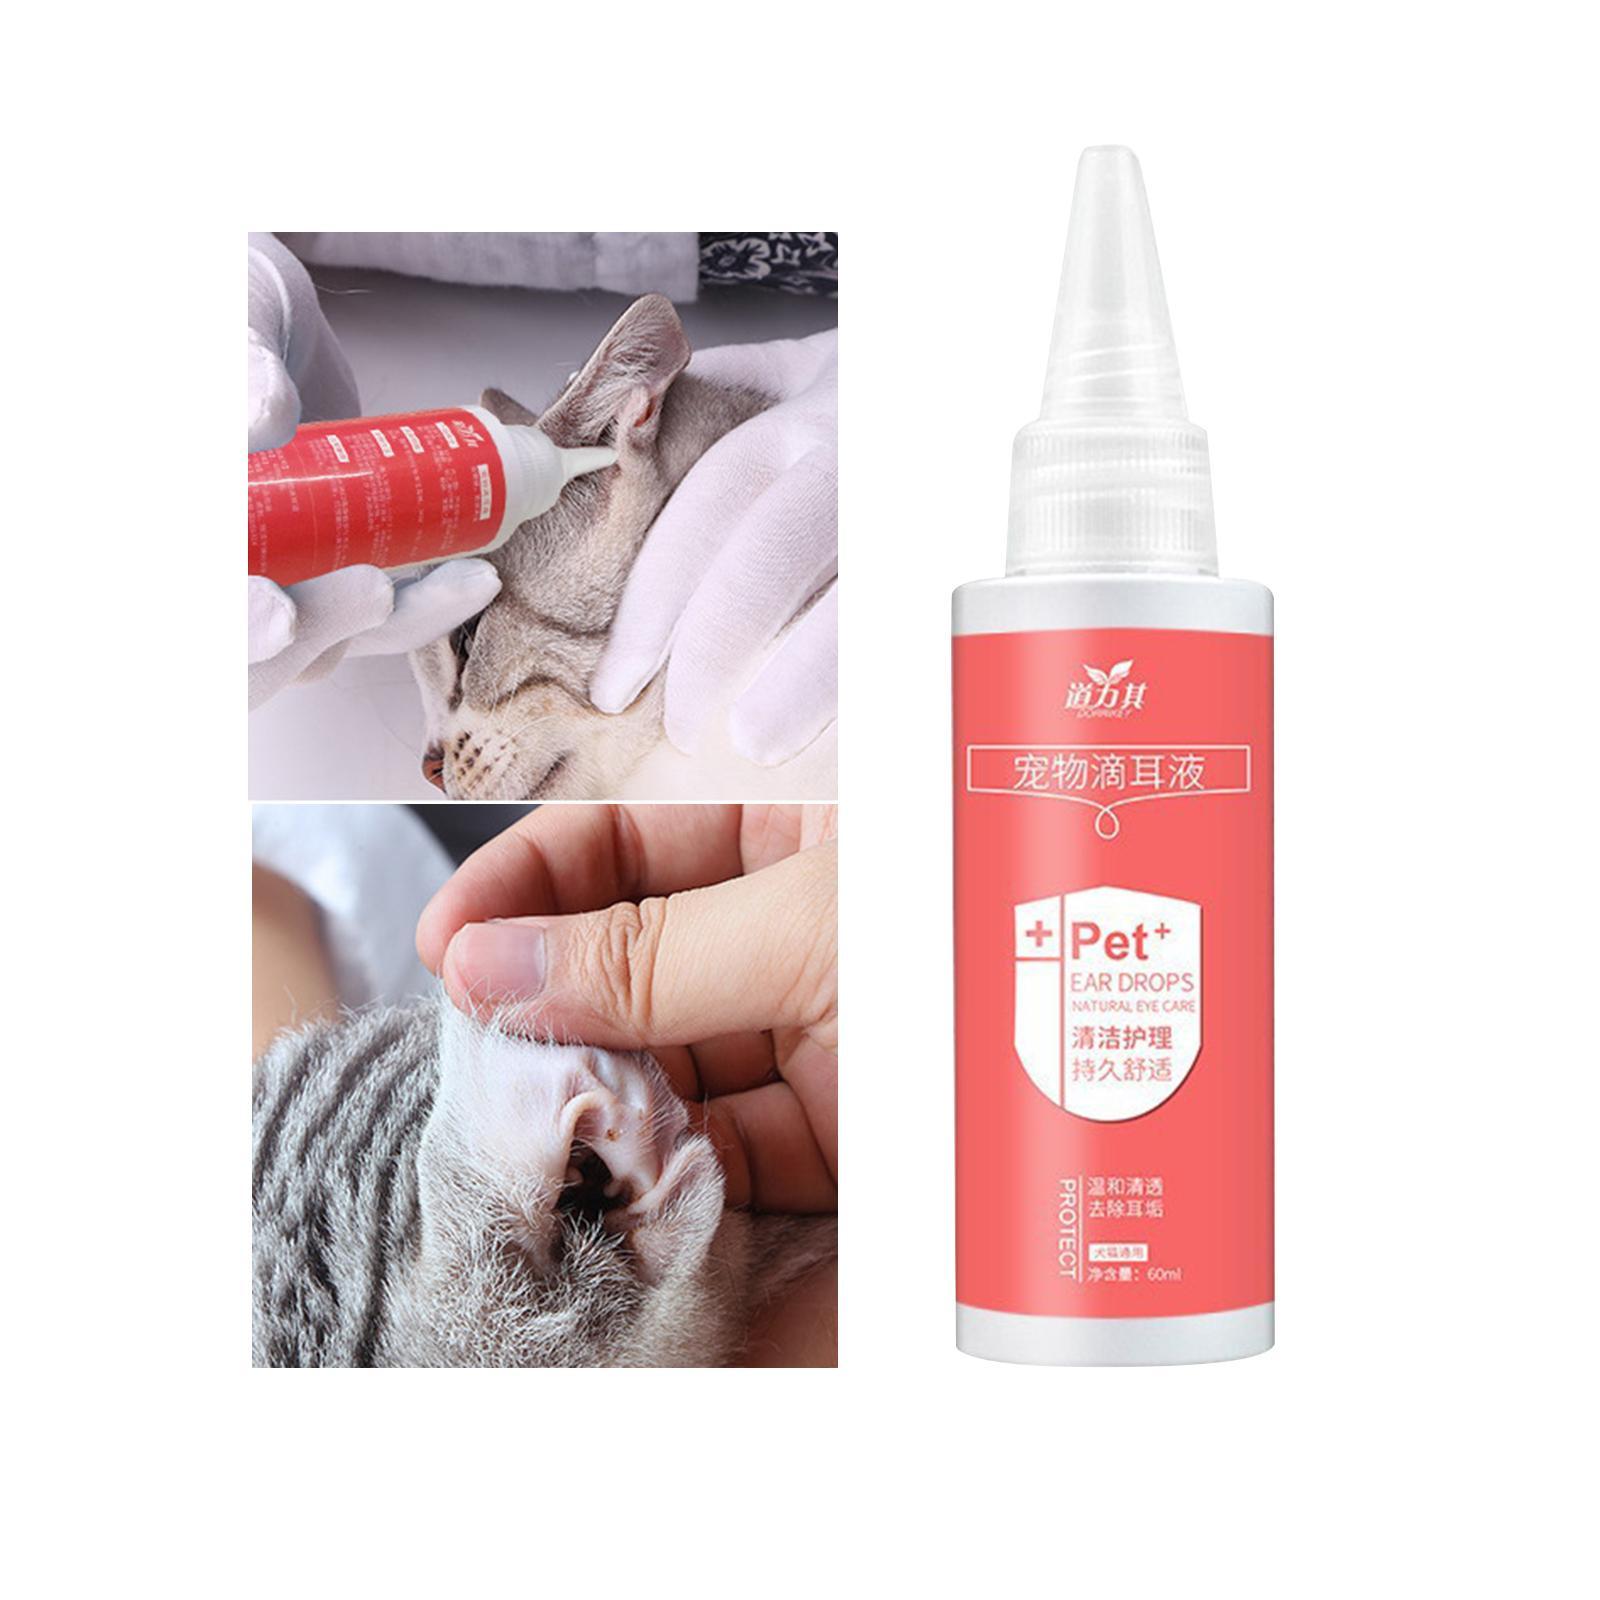 Ear Drops Ear  Remove for Dogs Puppy Drops  Cleaner Drops